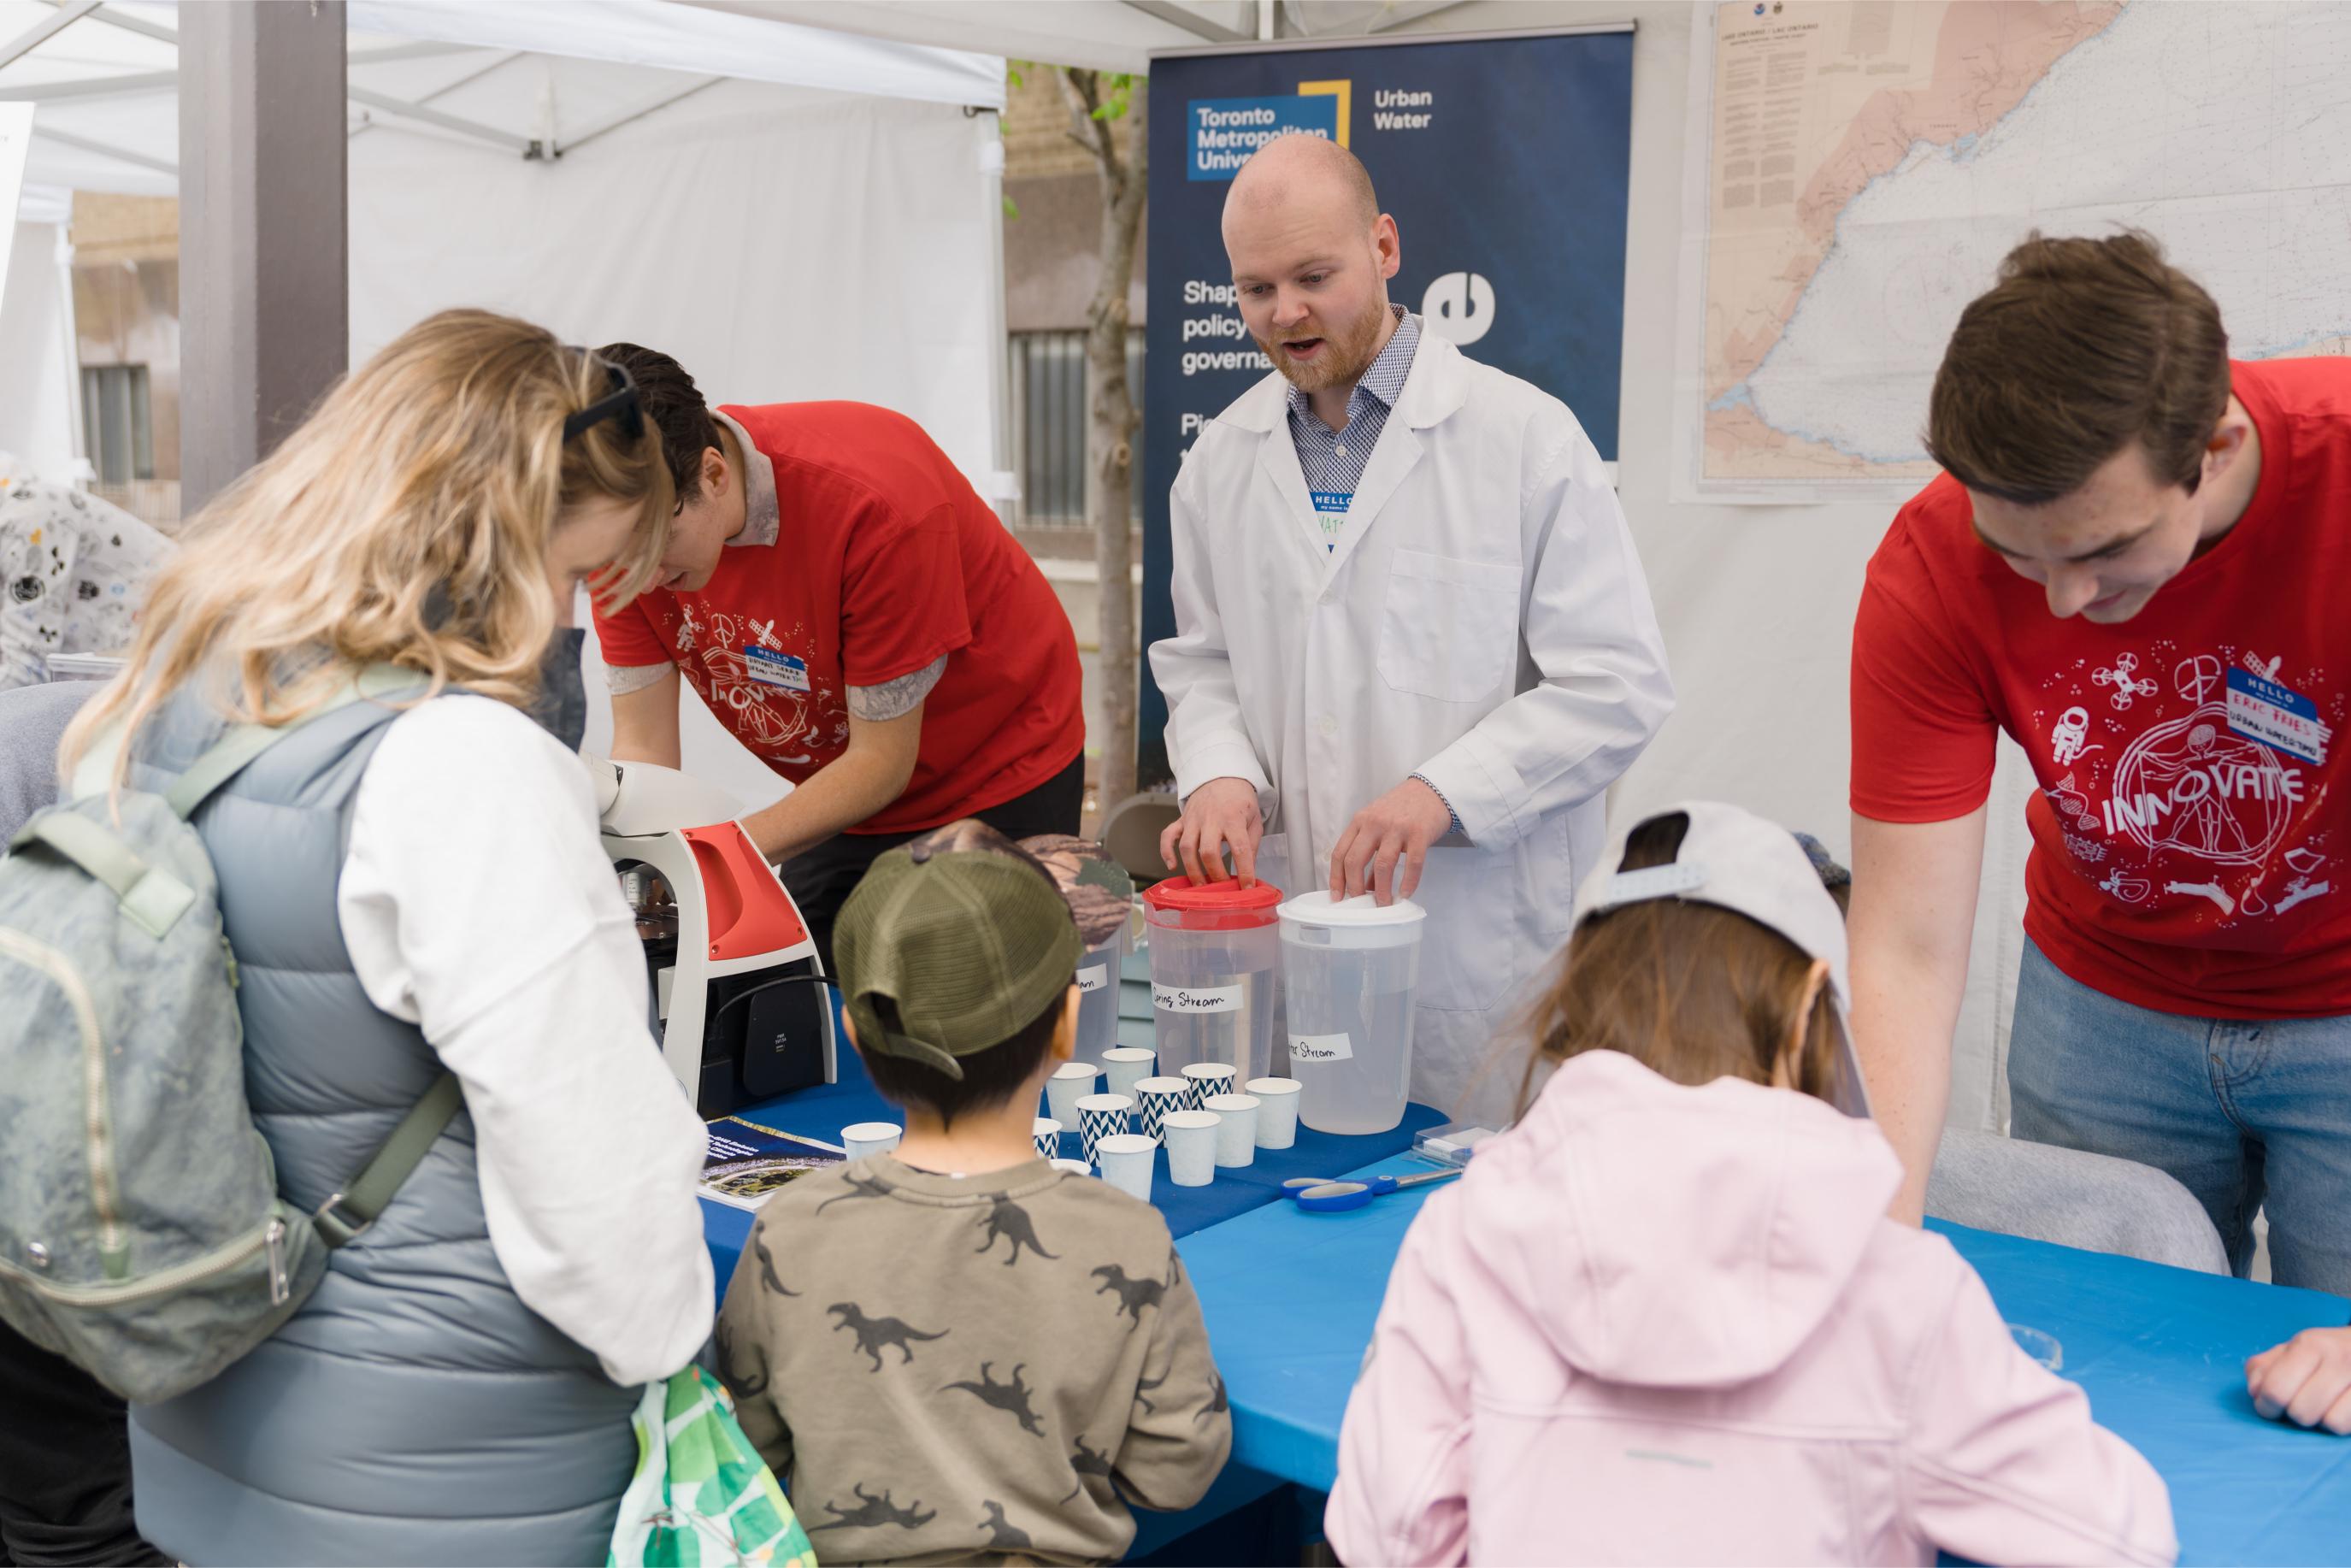 Volunteers interacting with participants at the Urban Water Booth.